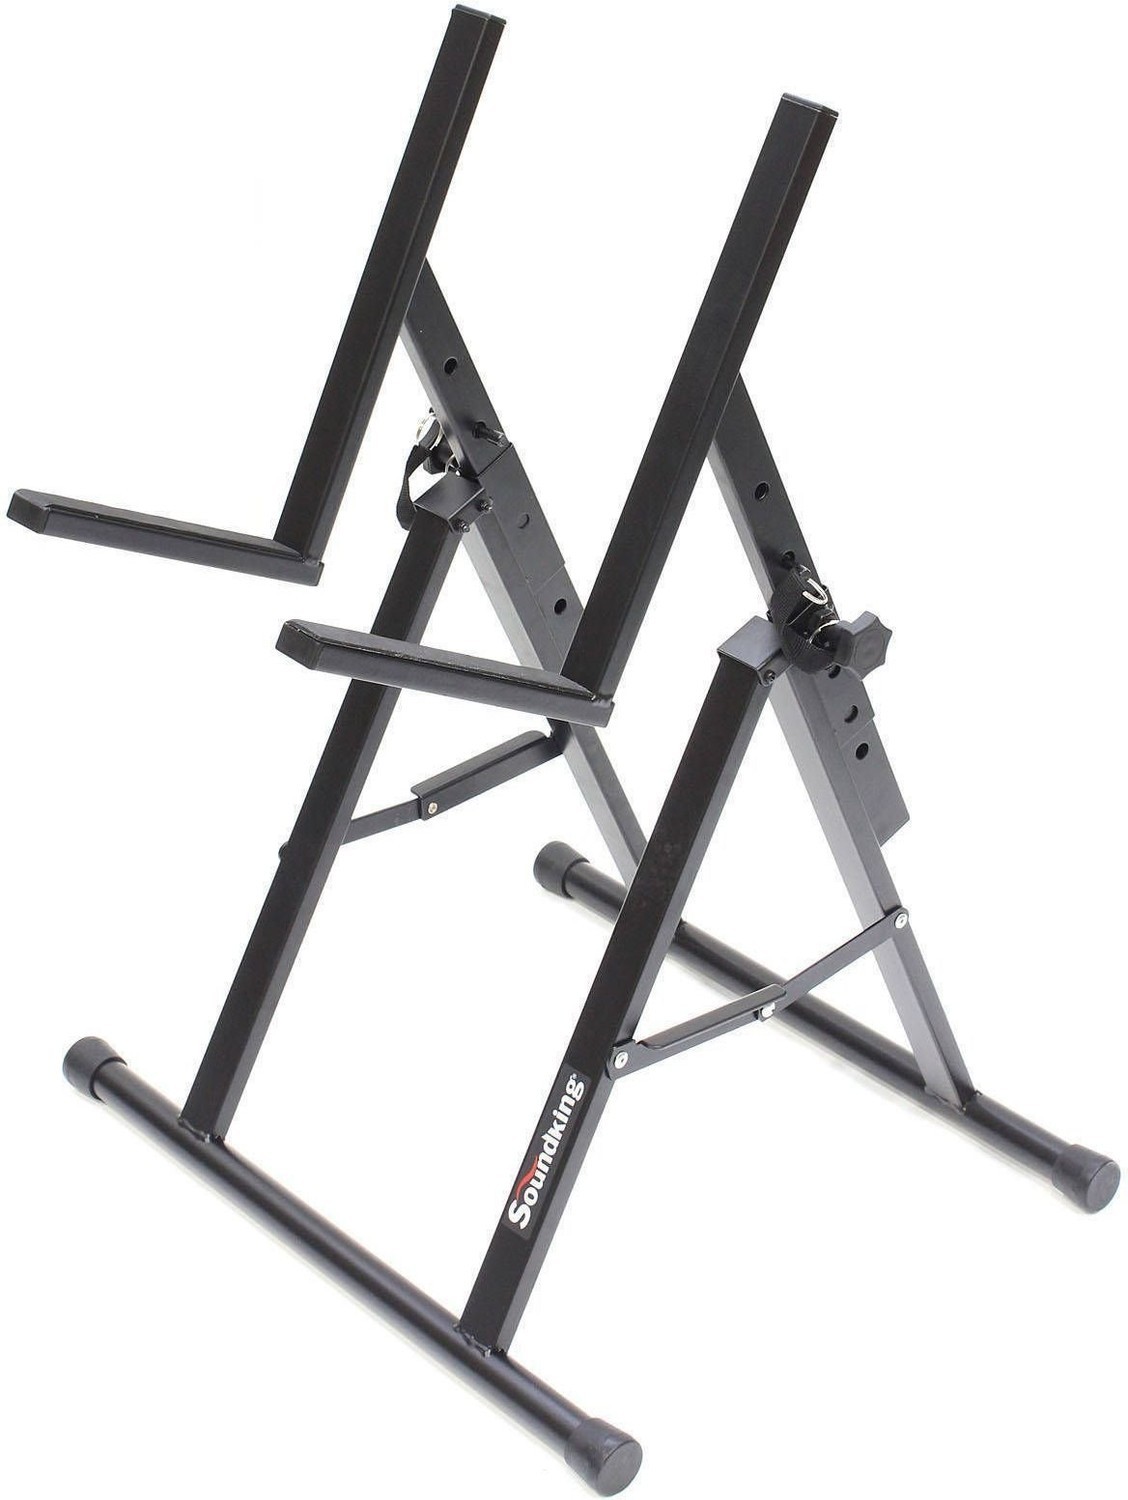 Soundking DG 020 Amp stand